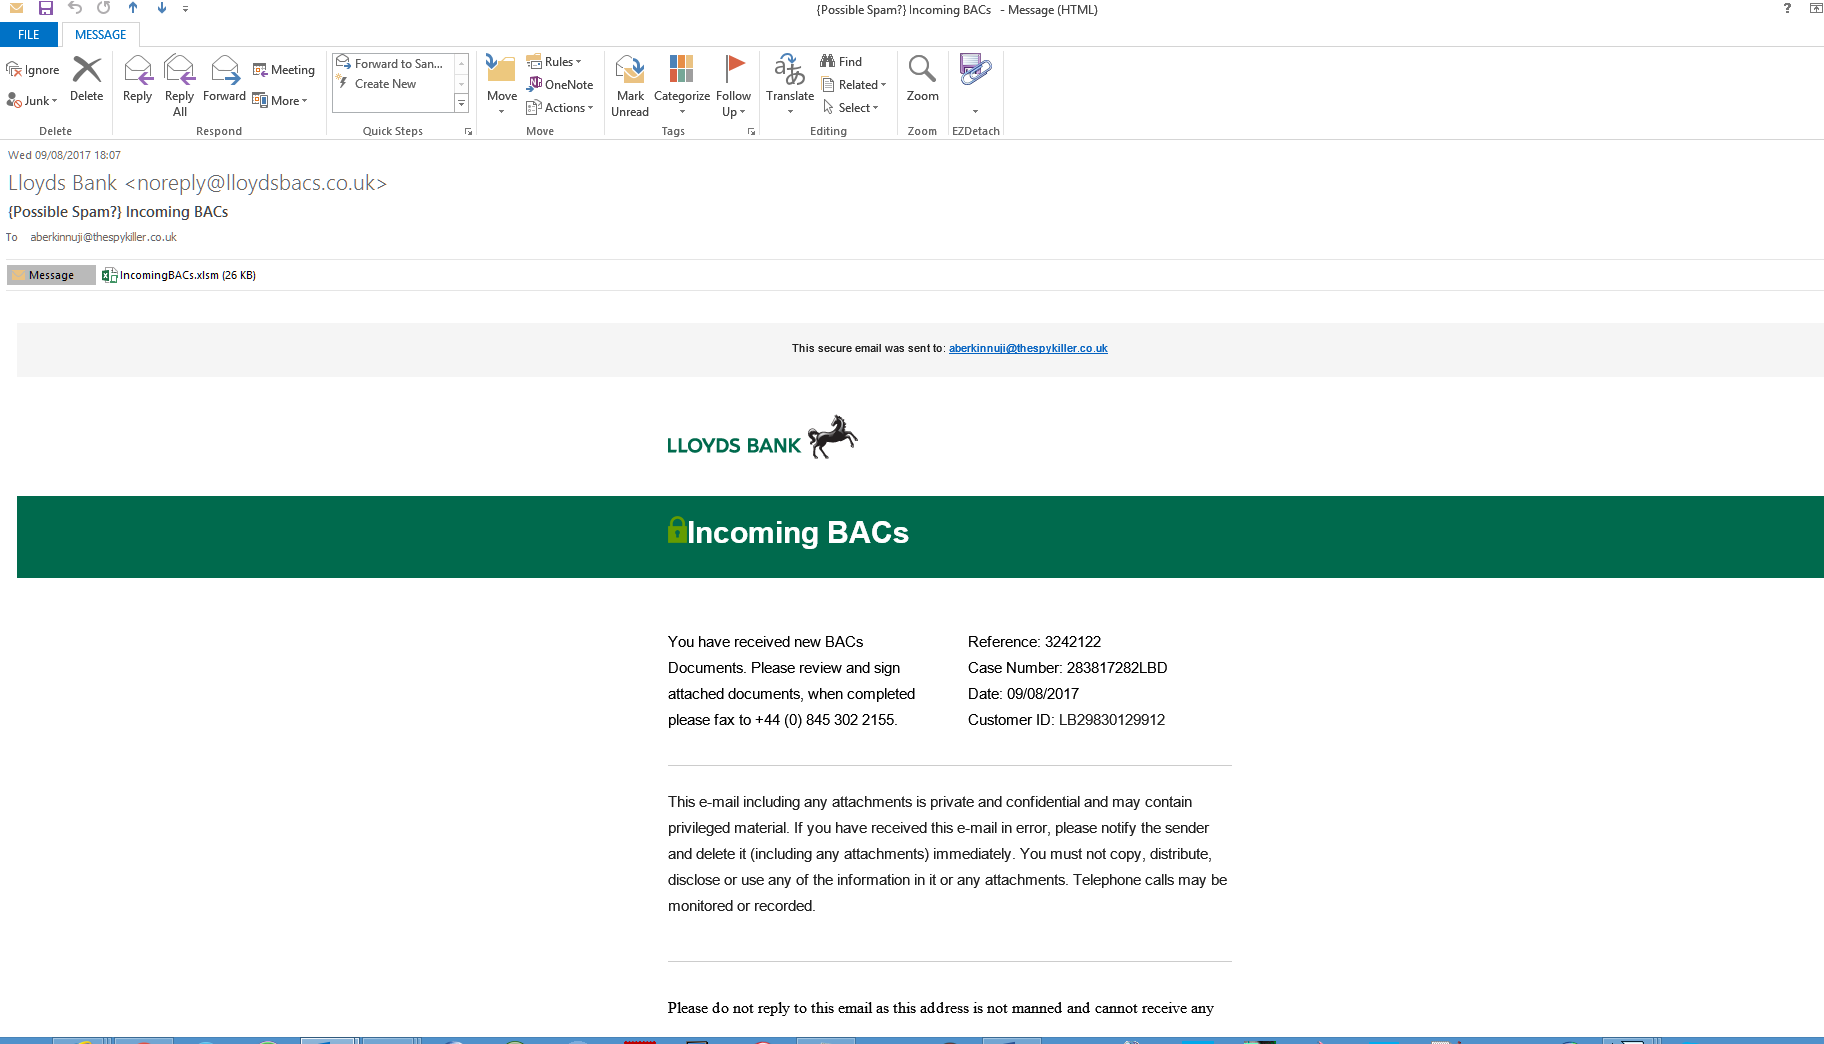 Spoofed Lloyds incoming BACS email